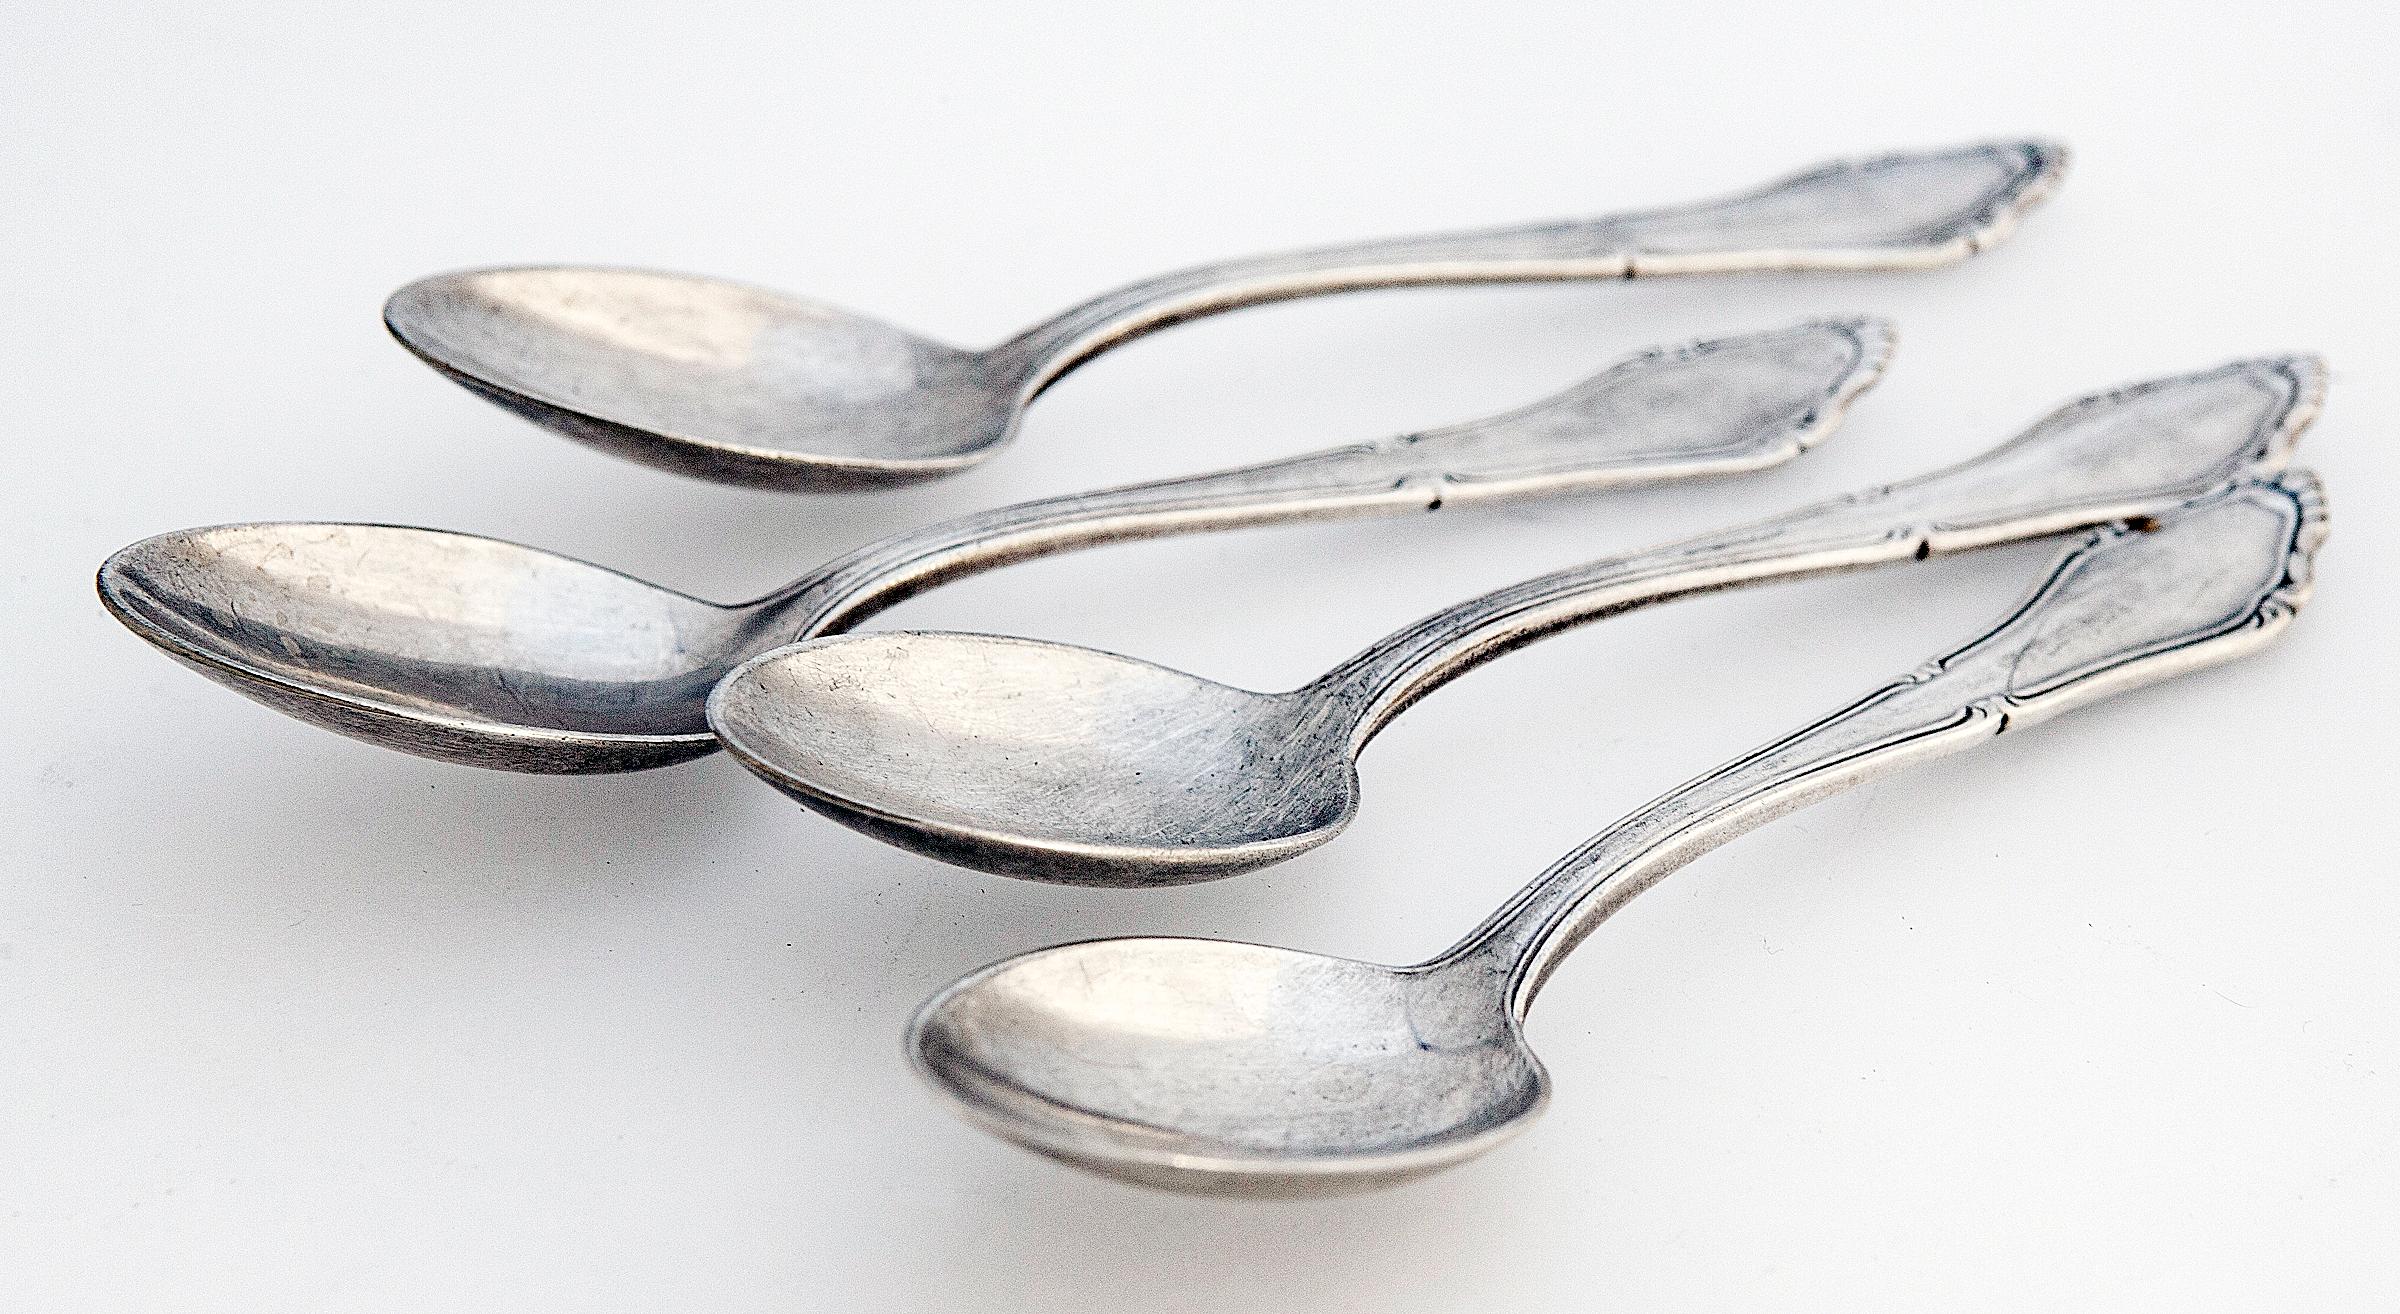 Set of Eight German Silver-plate Demitasse Spoons.
This flatware set is from one of the oldest & finest silverplate manufacturers in Germany. On separate listings, you will find knives, spoons both large & small & serving pieces as well.